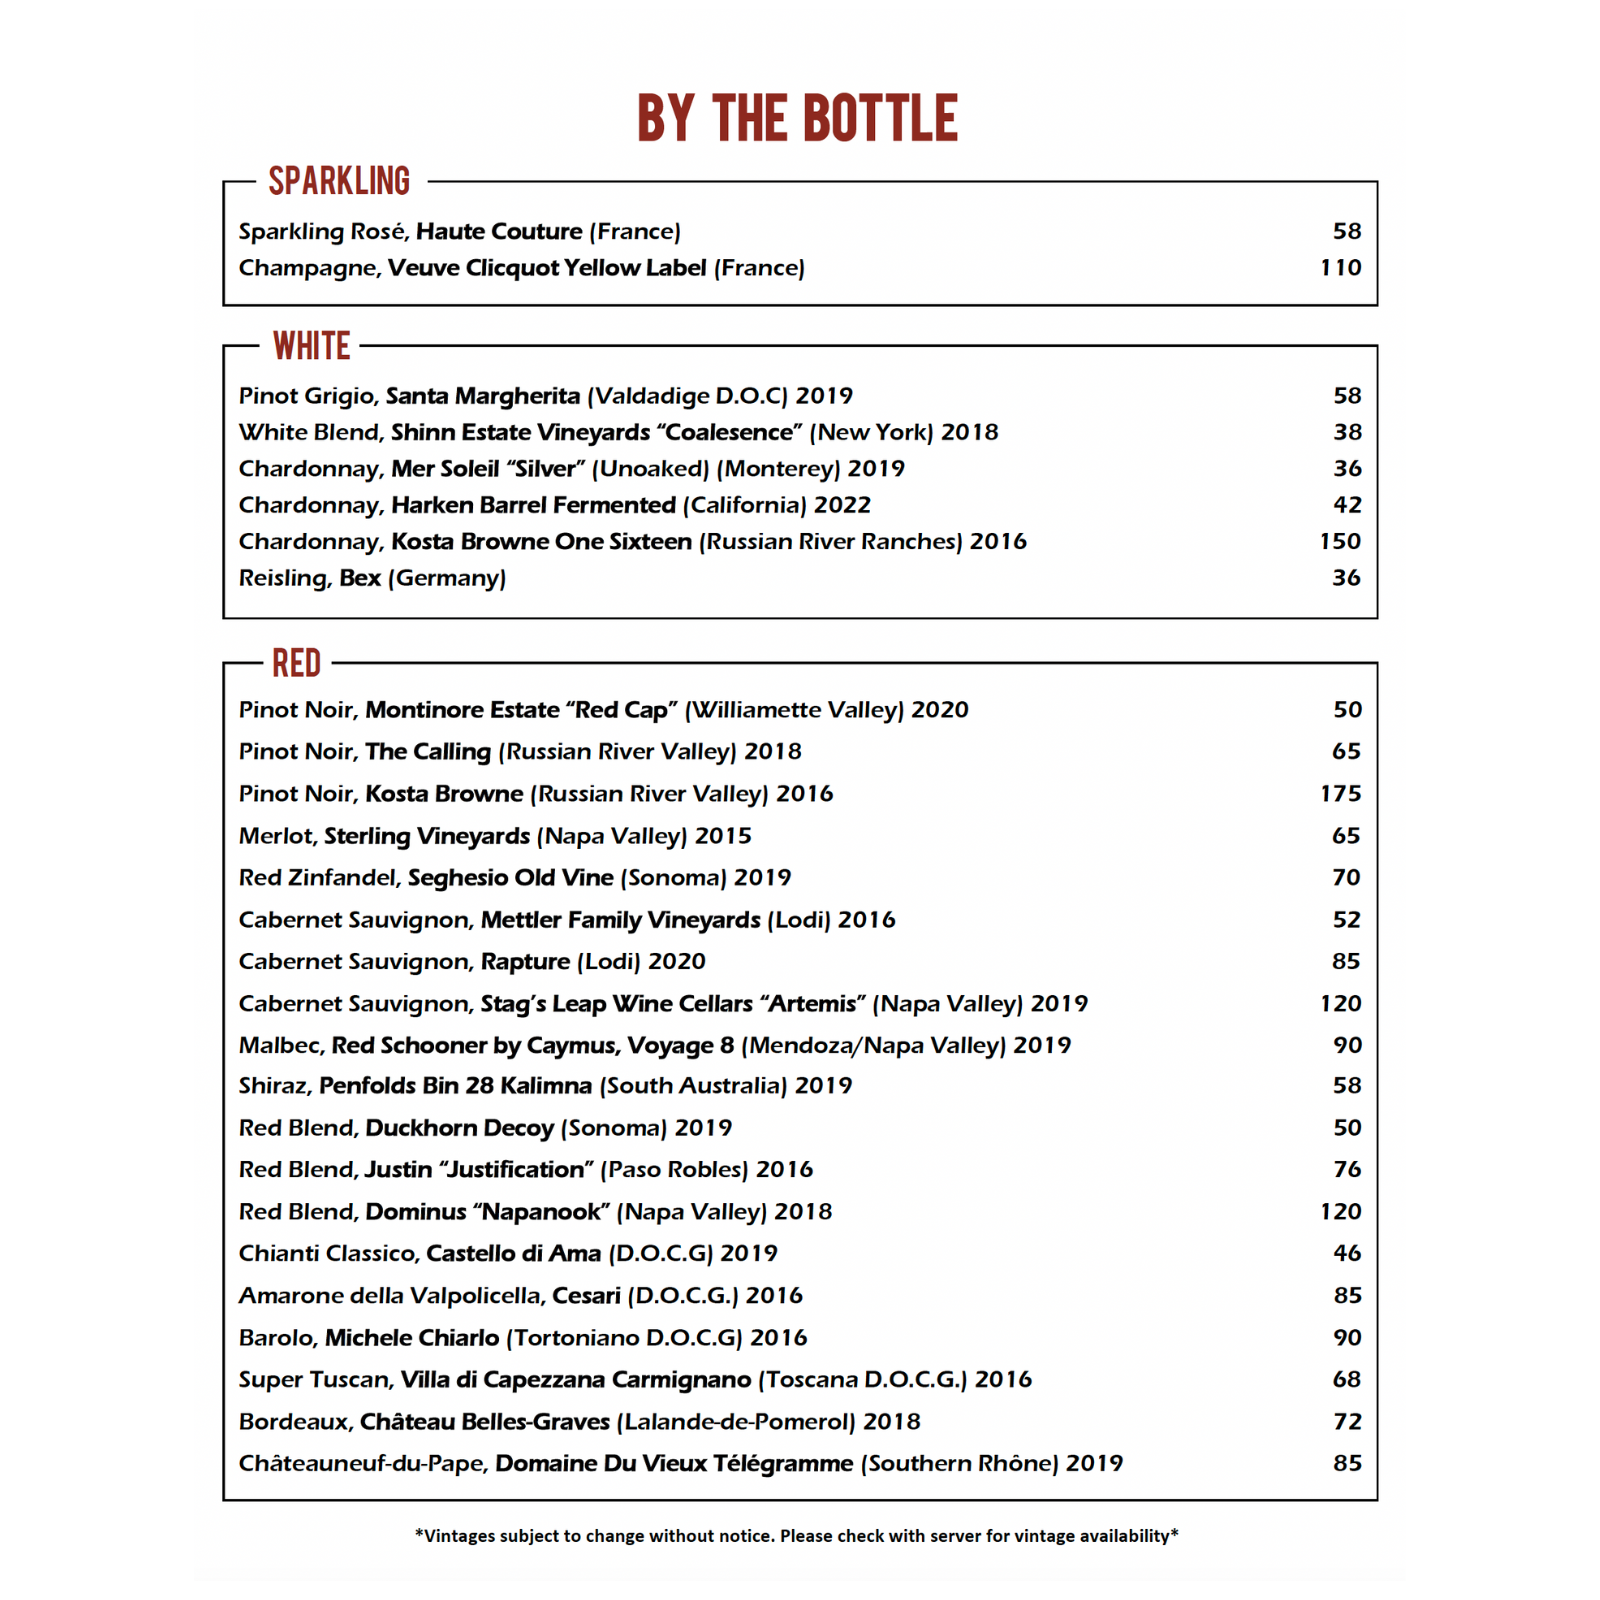 WINES BY THE BOTTLE